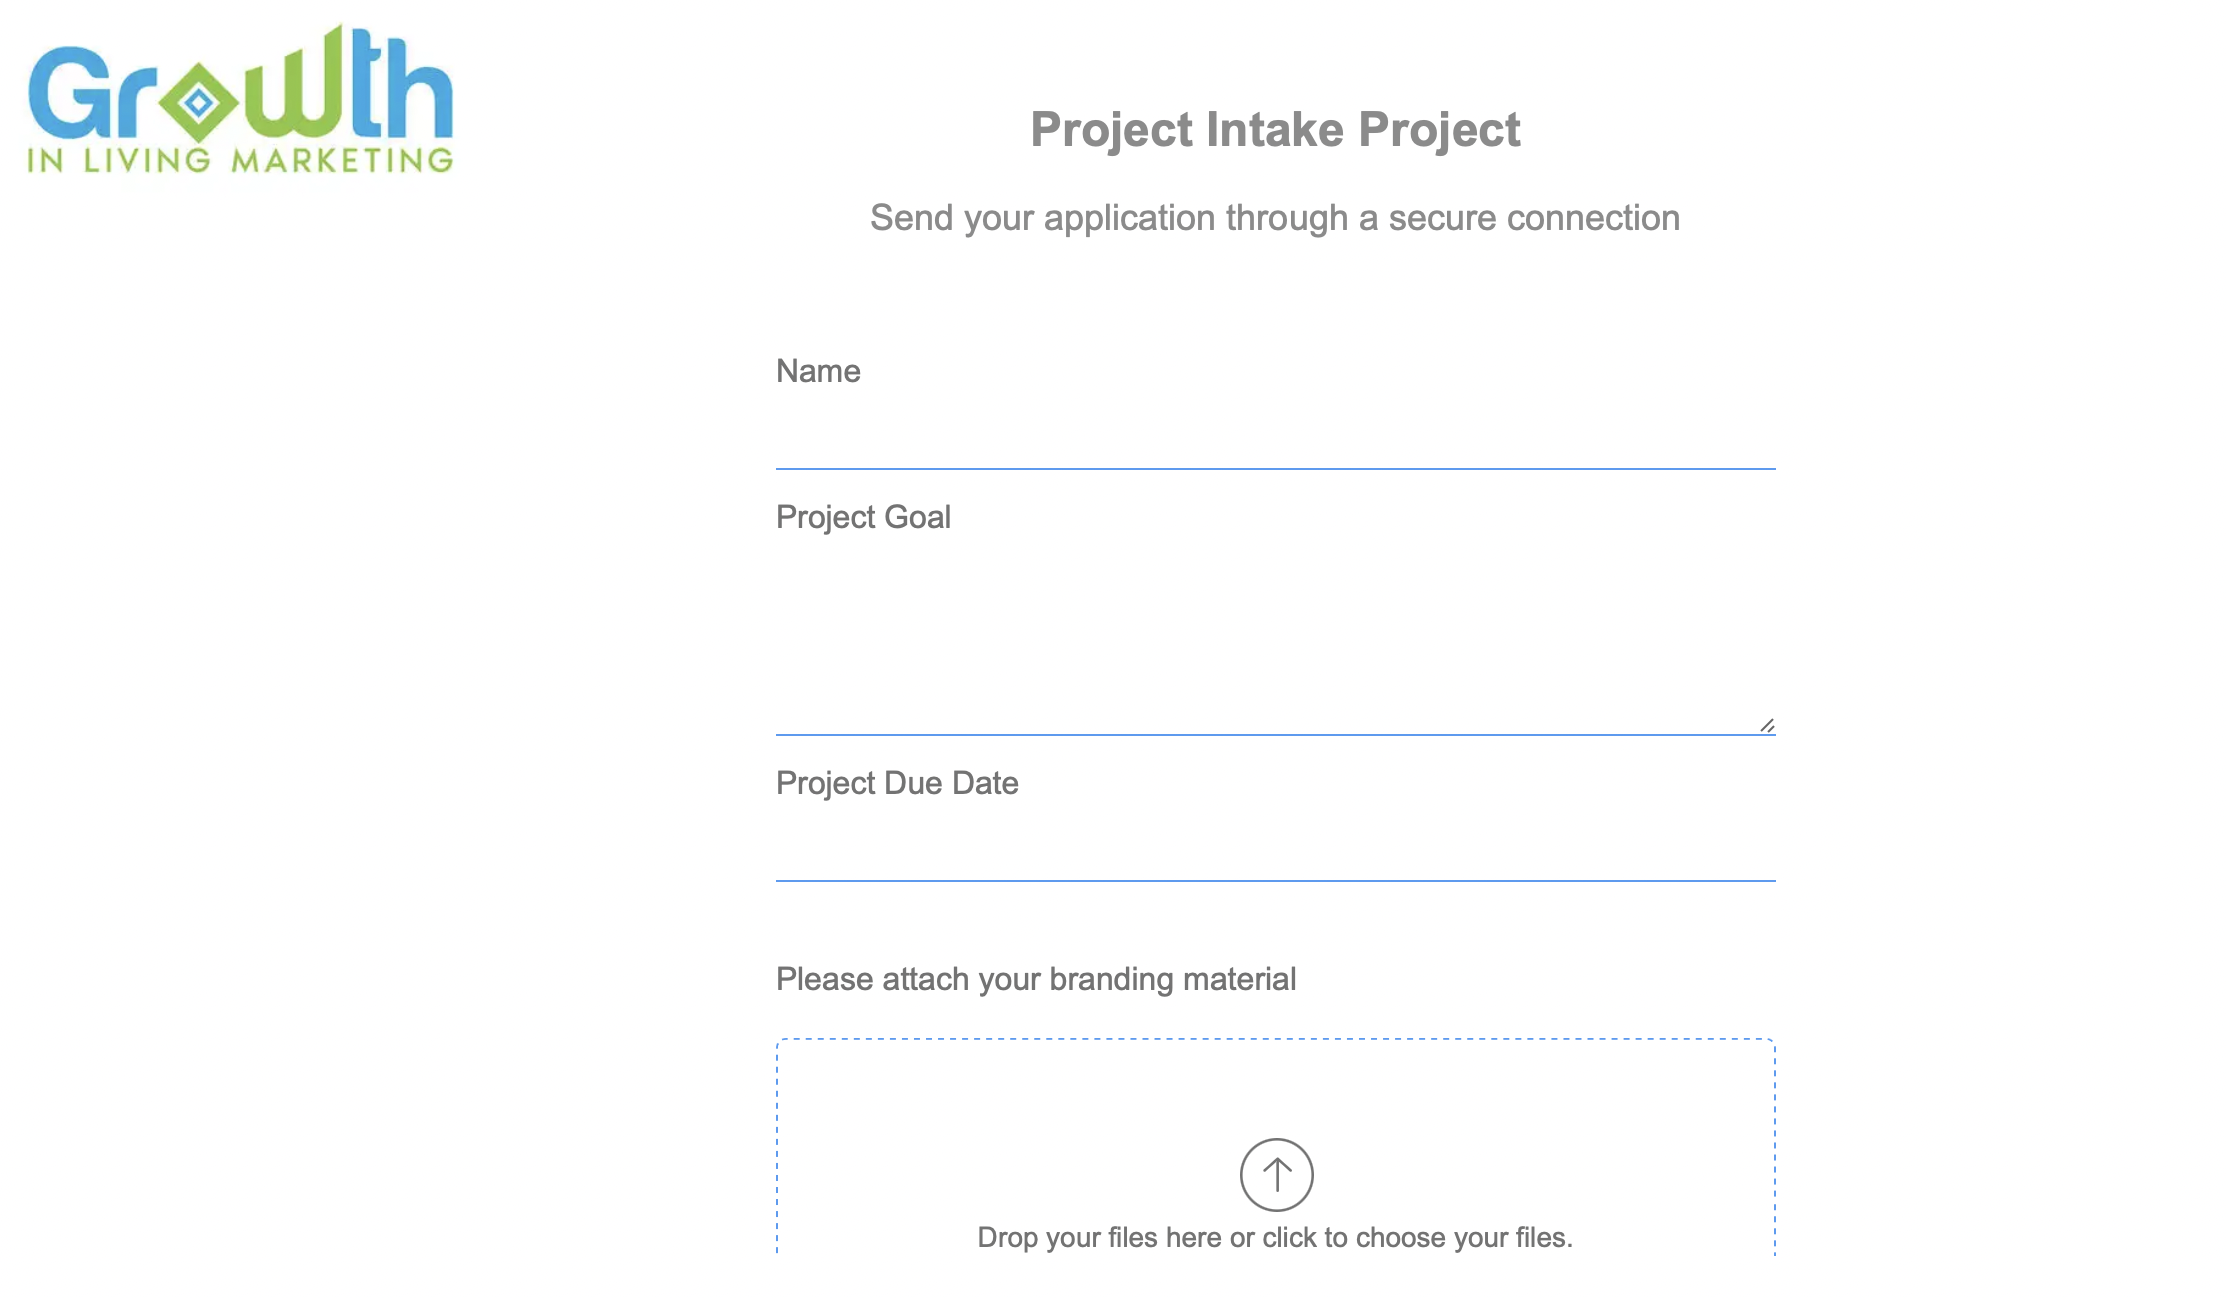 Project Intake form